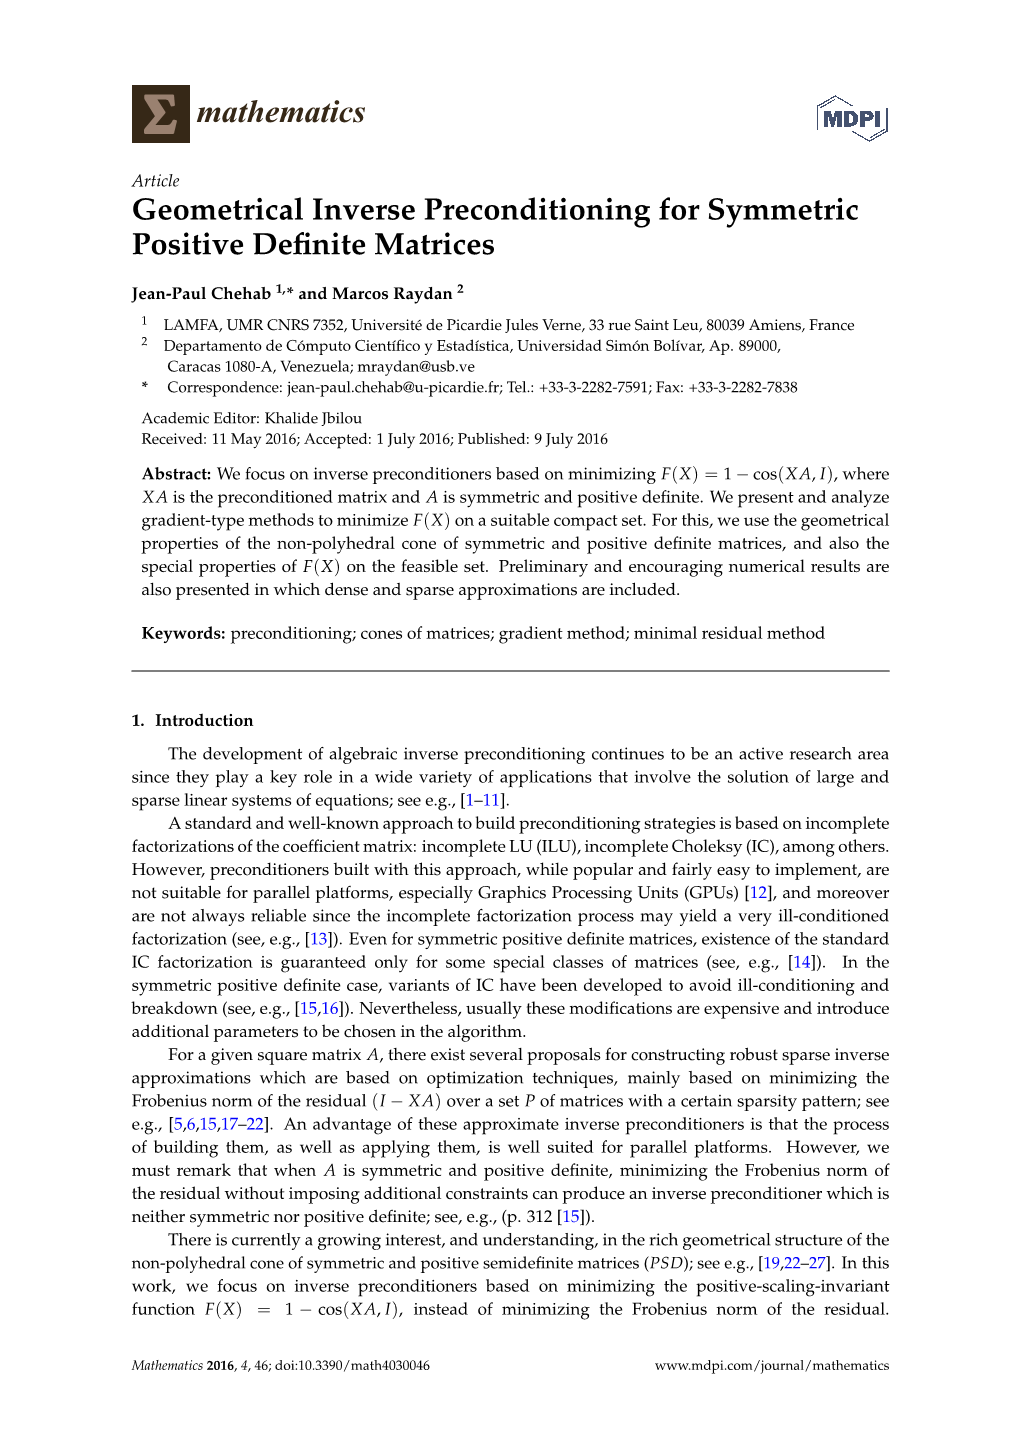 Geometrical Inverse Preconditioning for Symmetric Positive Definite Matrices